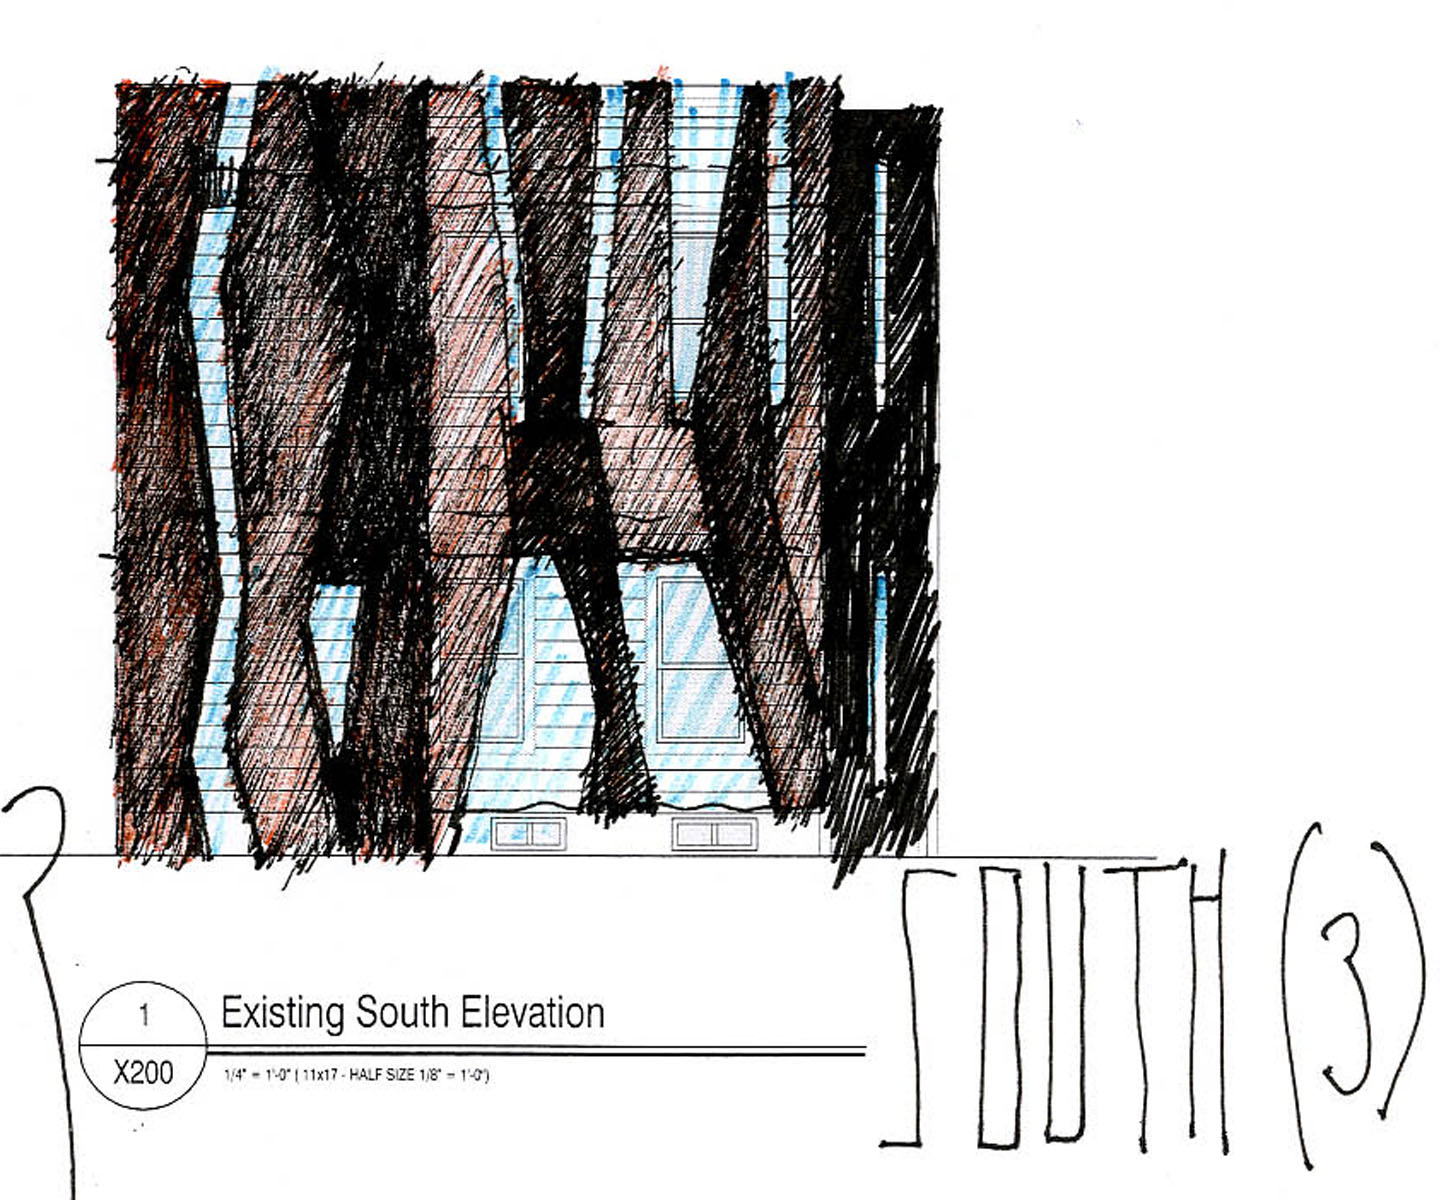 Front Elevation - Study of Rock Fissure Configuration